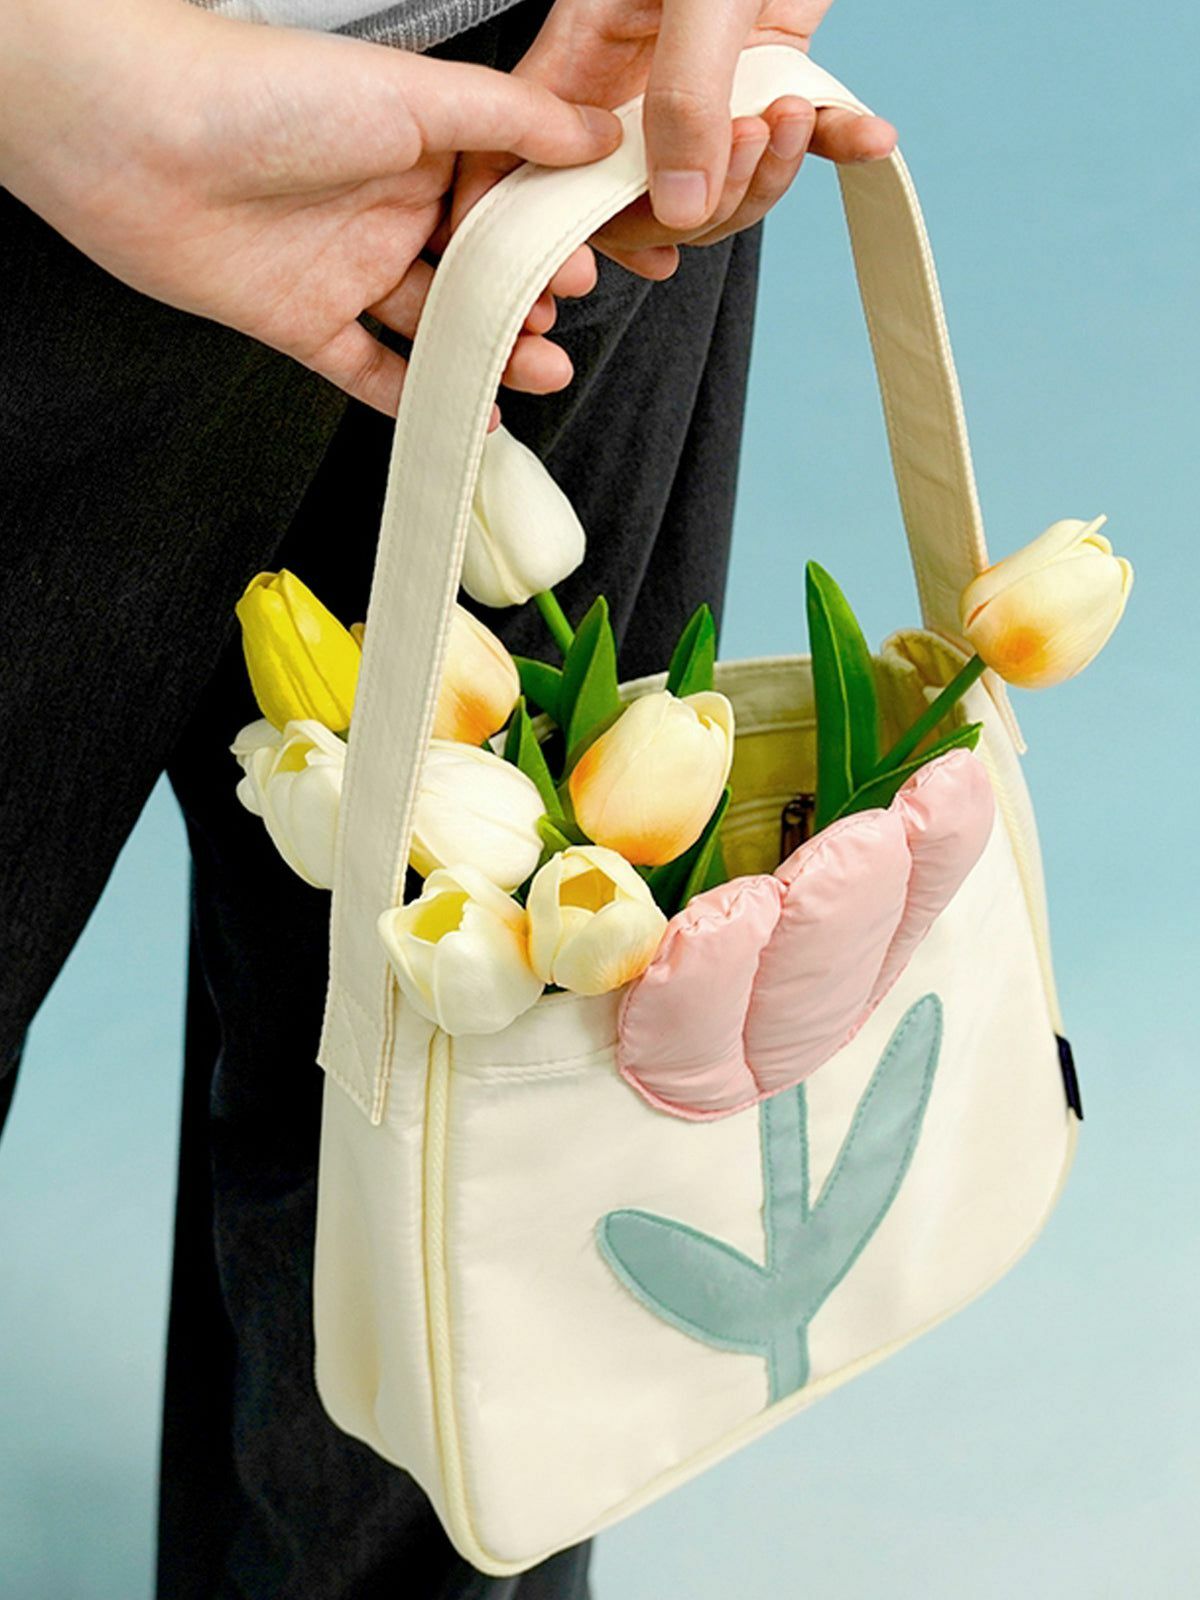 3d tulip flowers handbag   chic & crafted floral accessory 3516